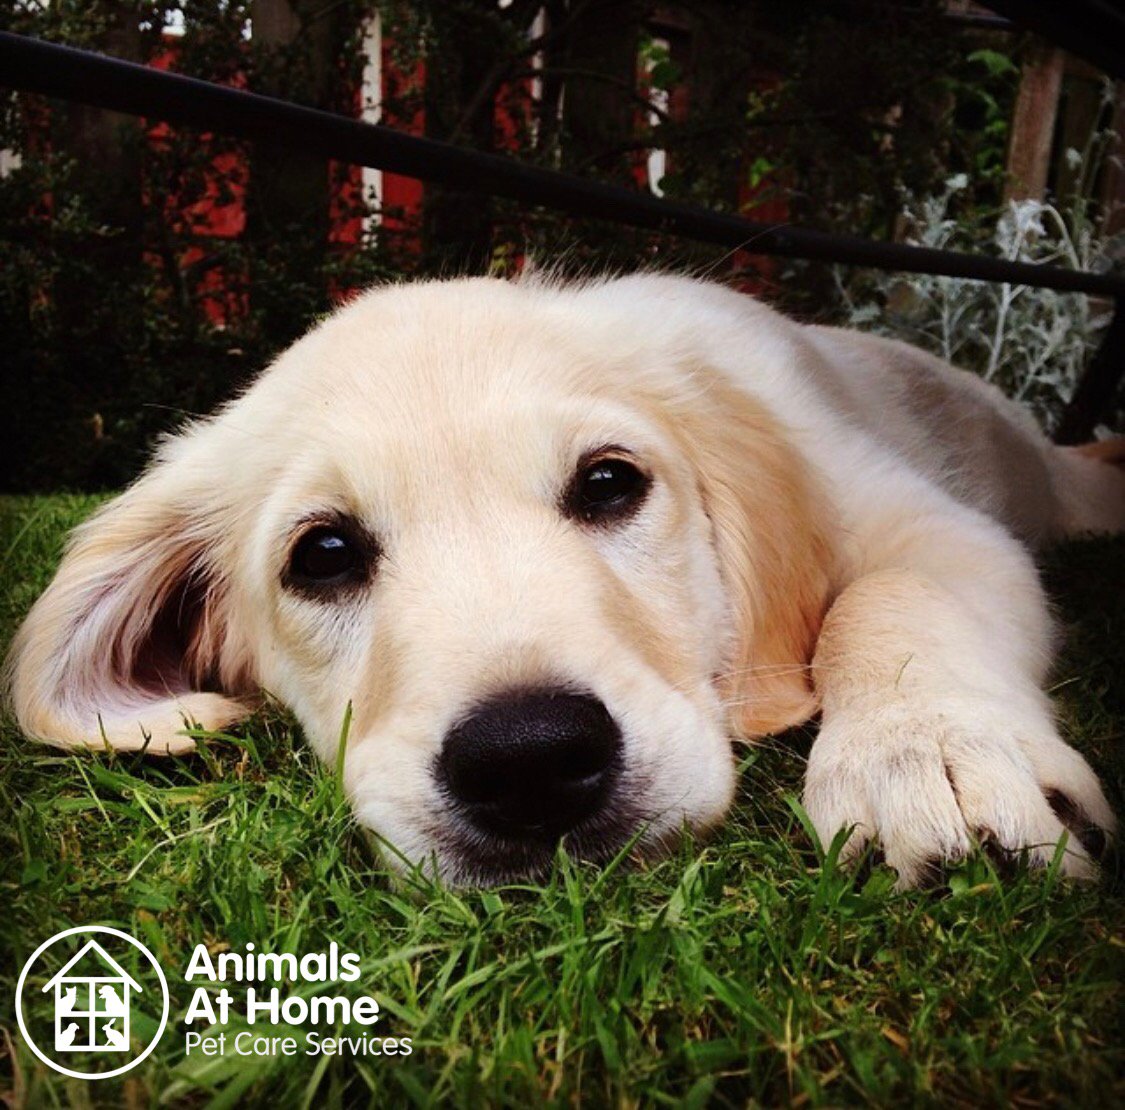 A quick #throwbackthursday. Before we became involved in #animalsathomenw, we trained a disability assistance dog on behalf of @caninepartnersuk. It was an incredibly rewarding experience. Here is Harper. #dog #puppy #puppiesofinstagram #dogsofinstagram #charity #assistancedog